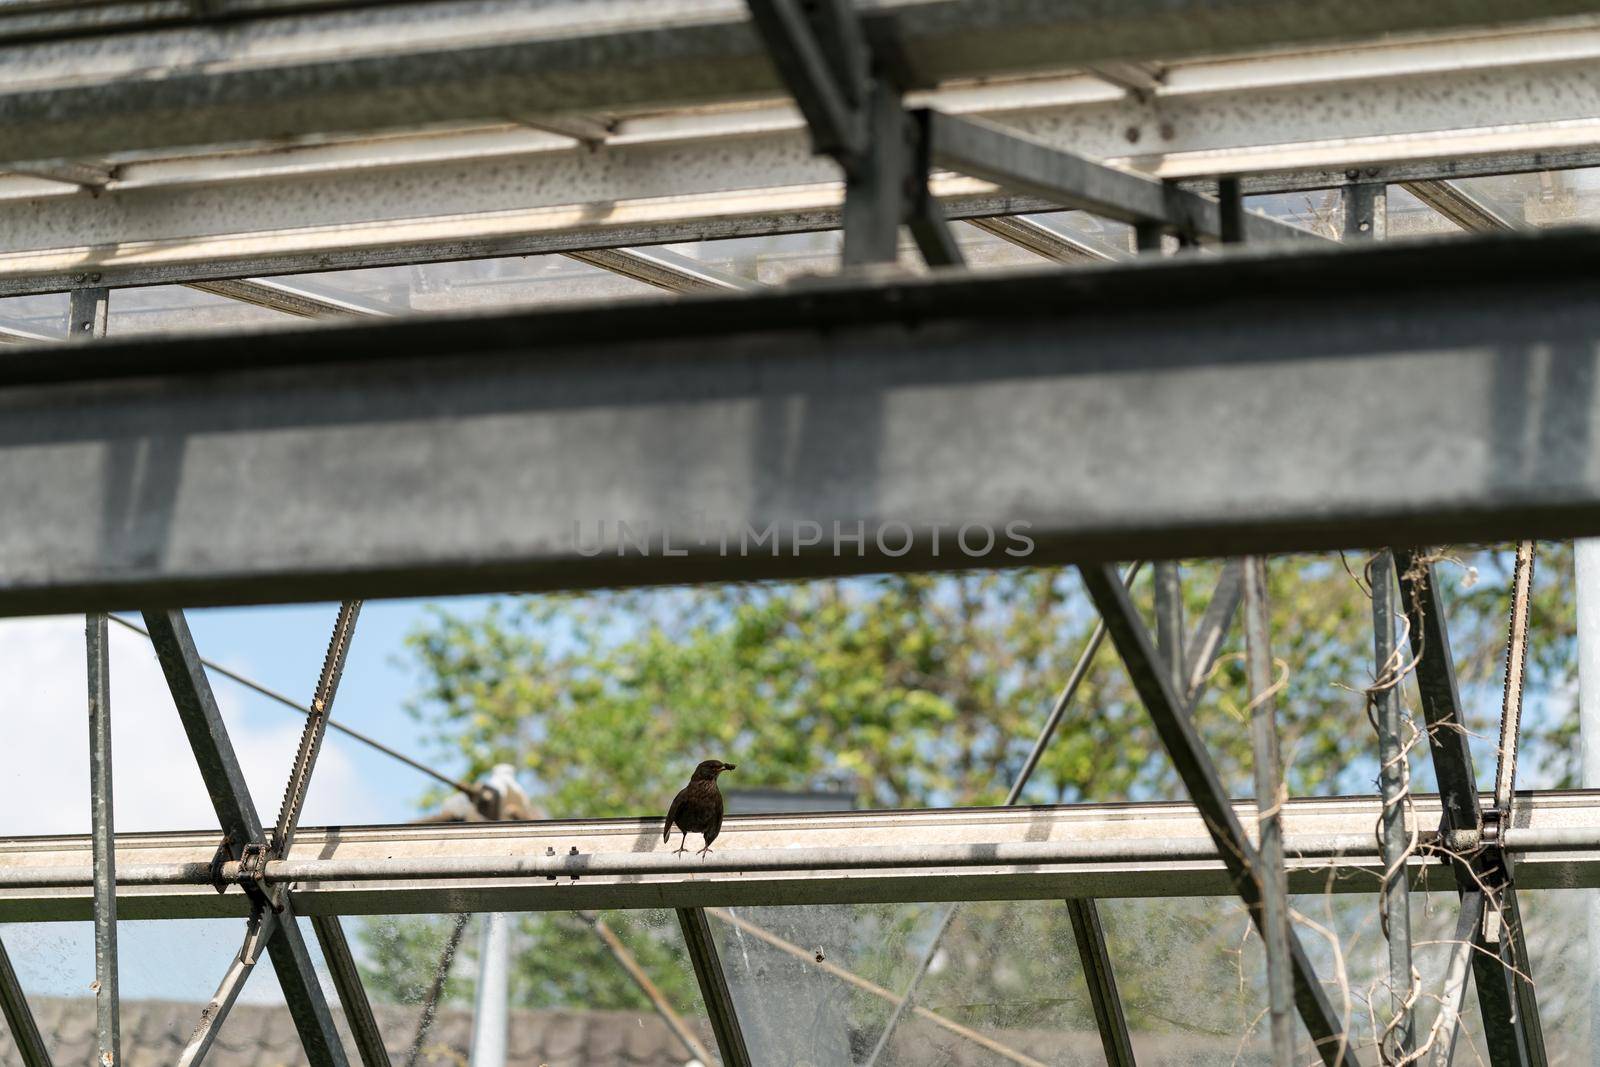 Female blackbird with a insect food for her young sitting on a ledge inside greenhouse